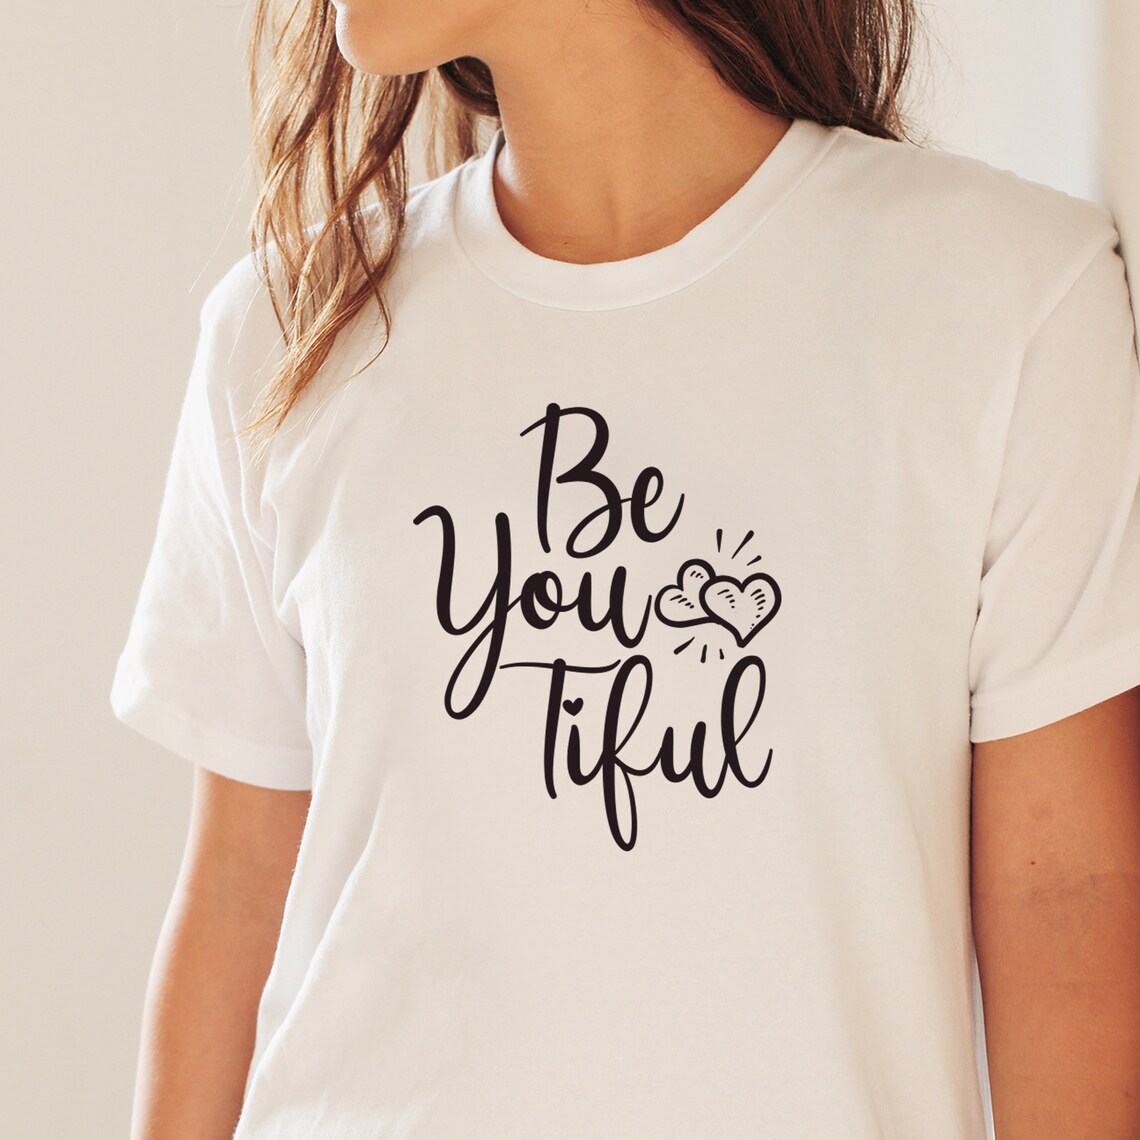 Be You Tiful SVG DXF PNG Image Files Svg Files for Cricut - Etsy